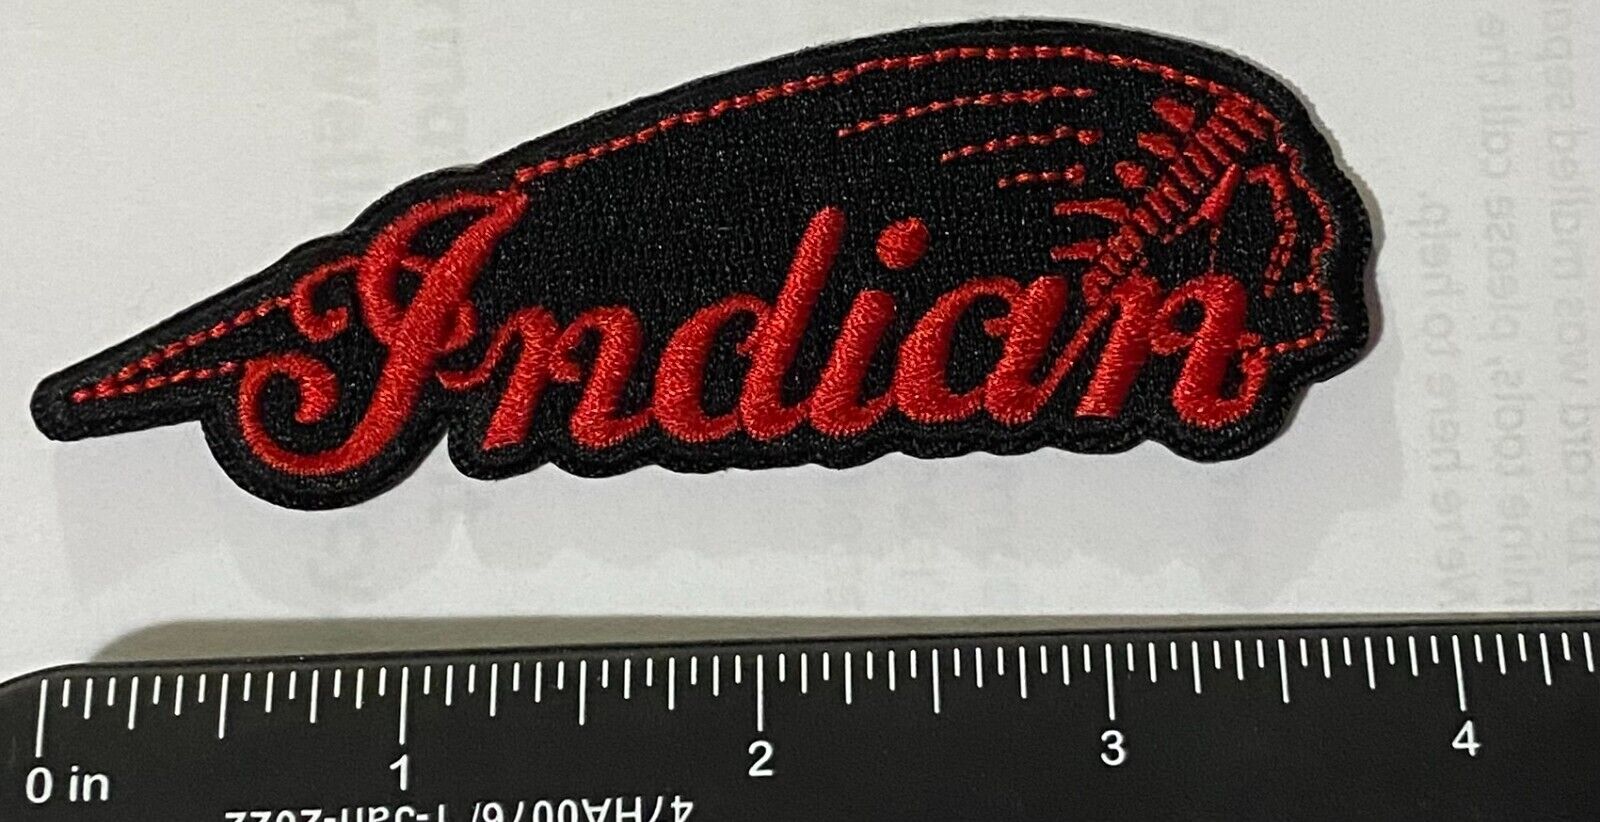 INDIAN MOTORCYCLE INDIAN HEAD DRESS IRON-ON BIKER PATCH BUY 2 & GET ONE FREE